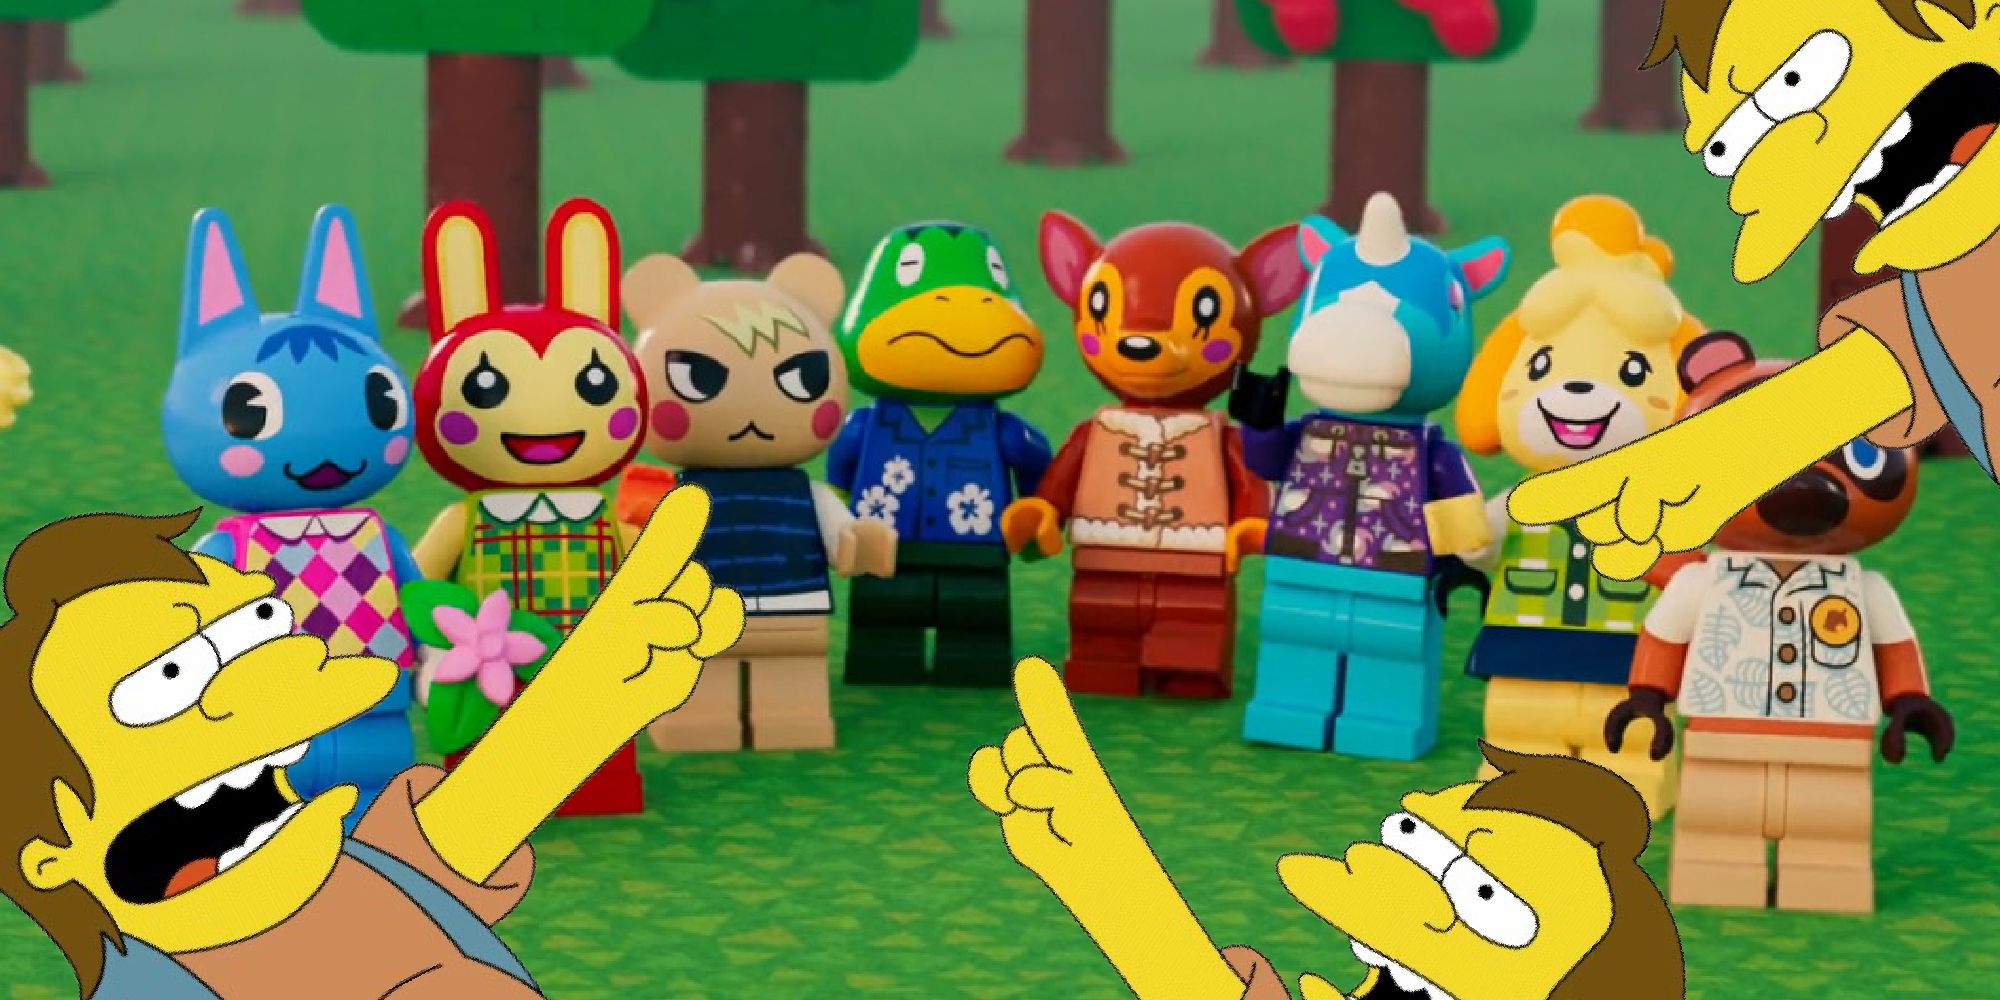 Animal Crossing Lego figures standing in a row while three Nelsons from The Simpsons point and laugh